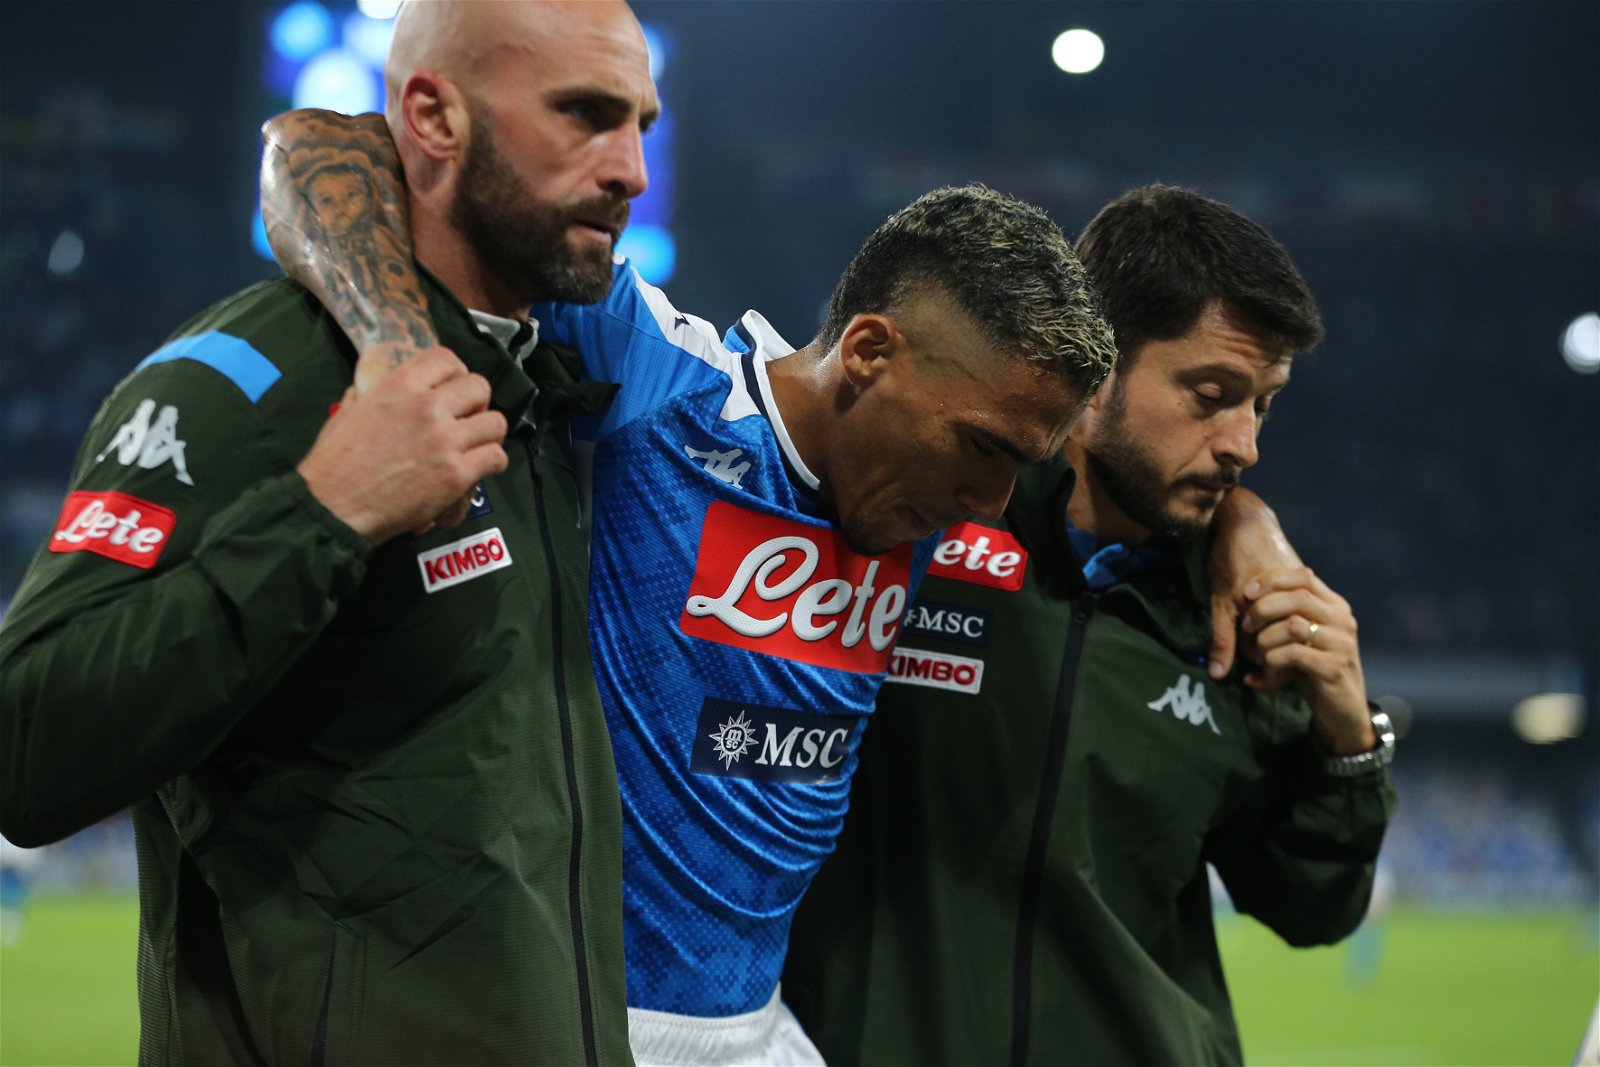 Napoli midfielder Allan out of action with knee injury against Atalanta